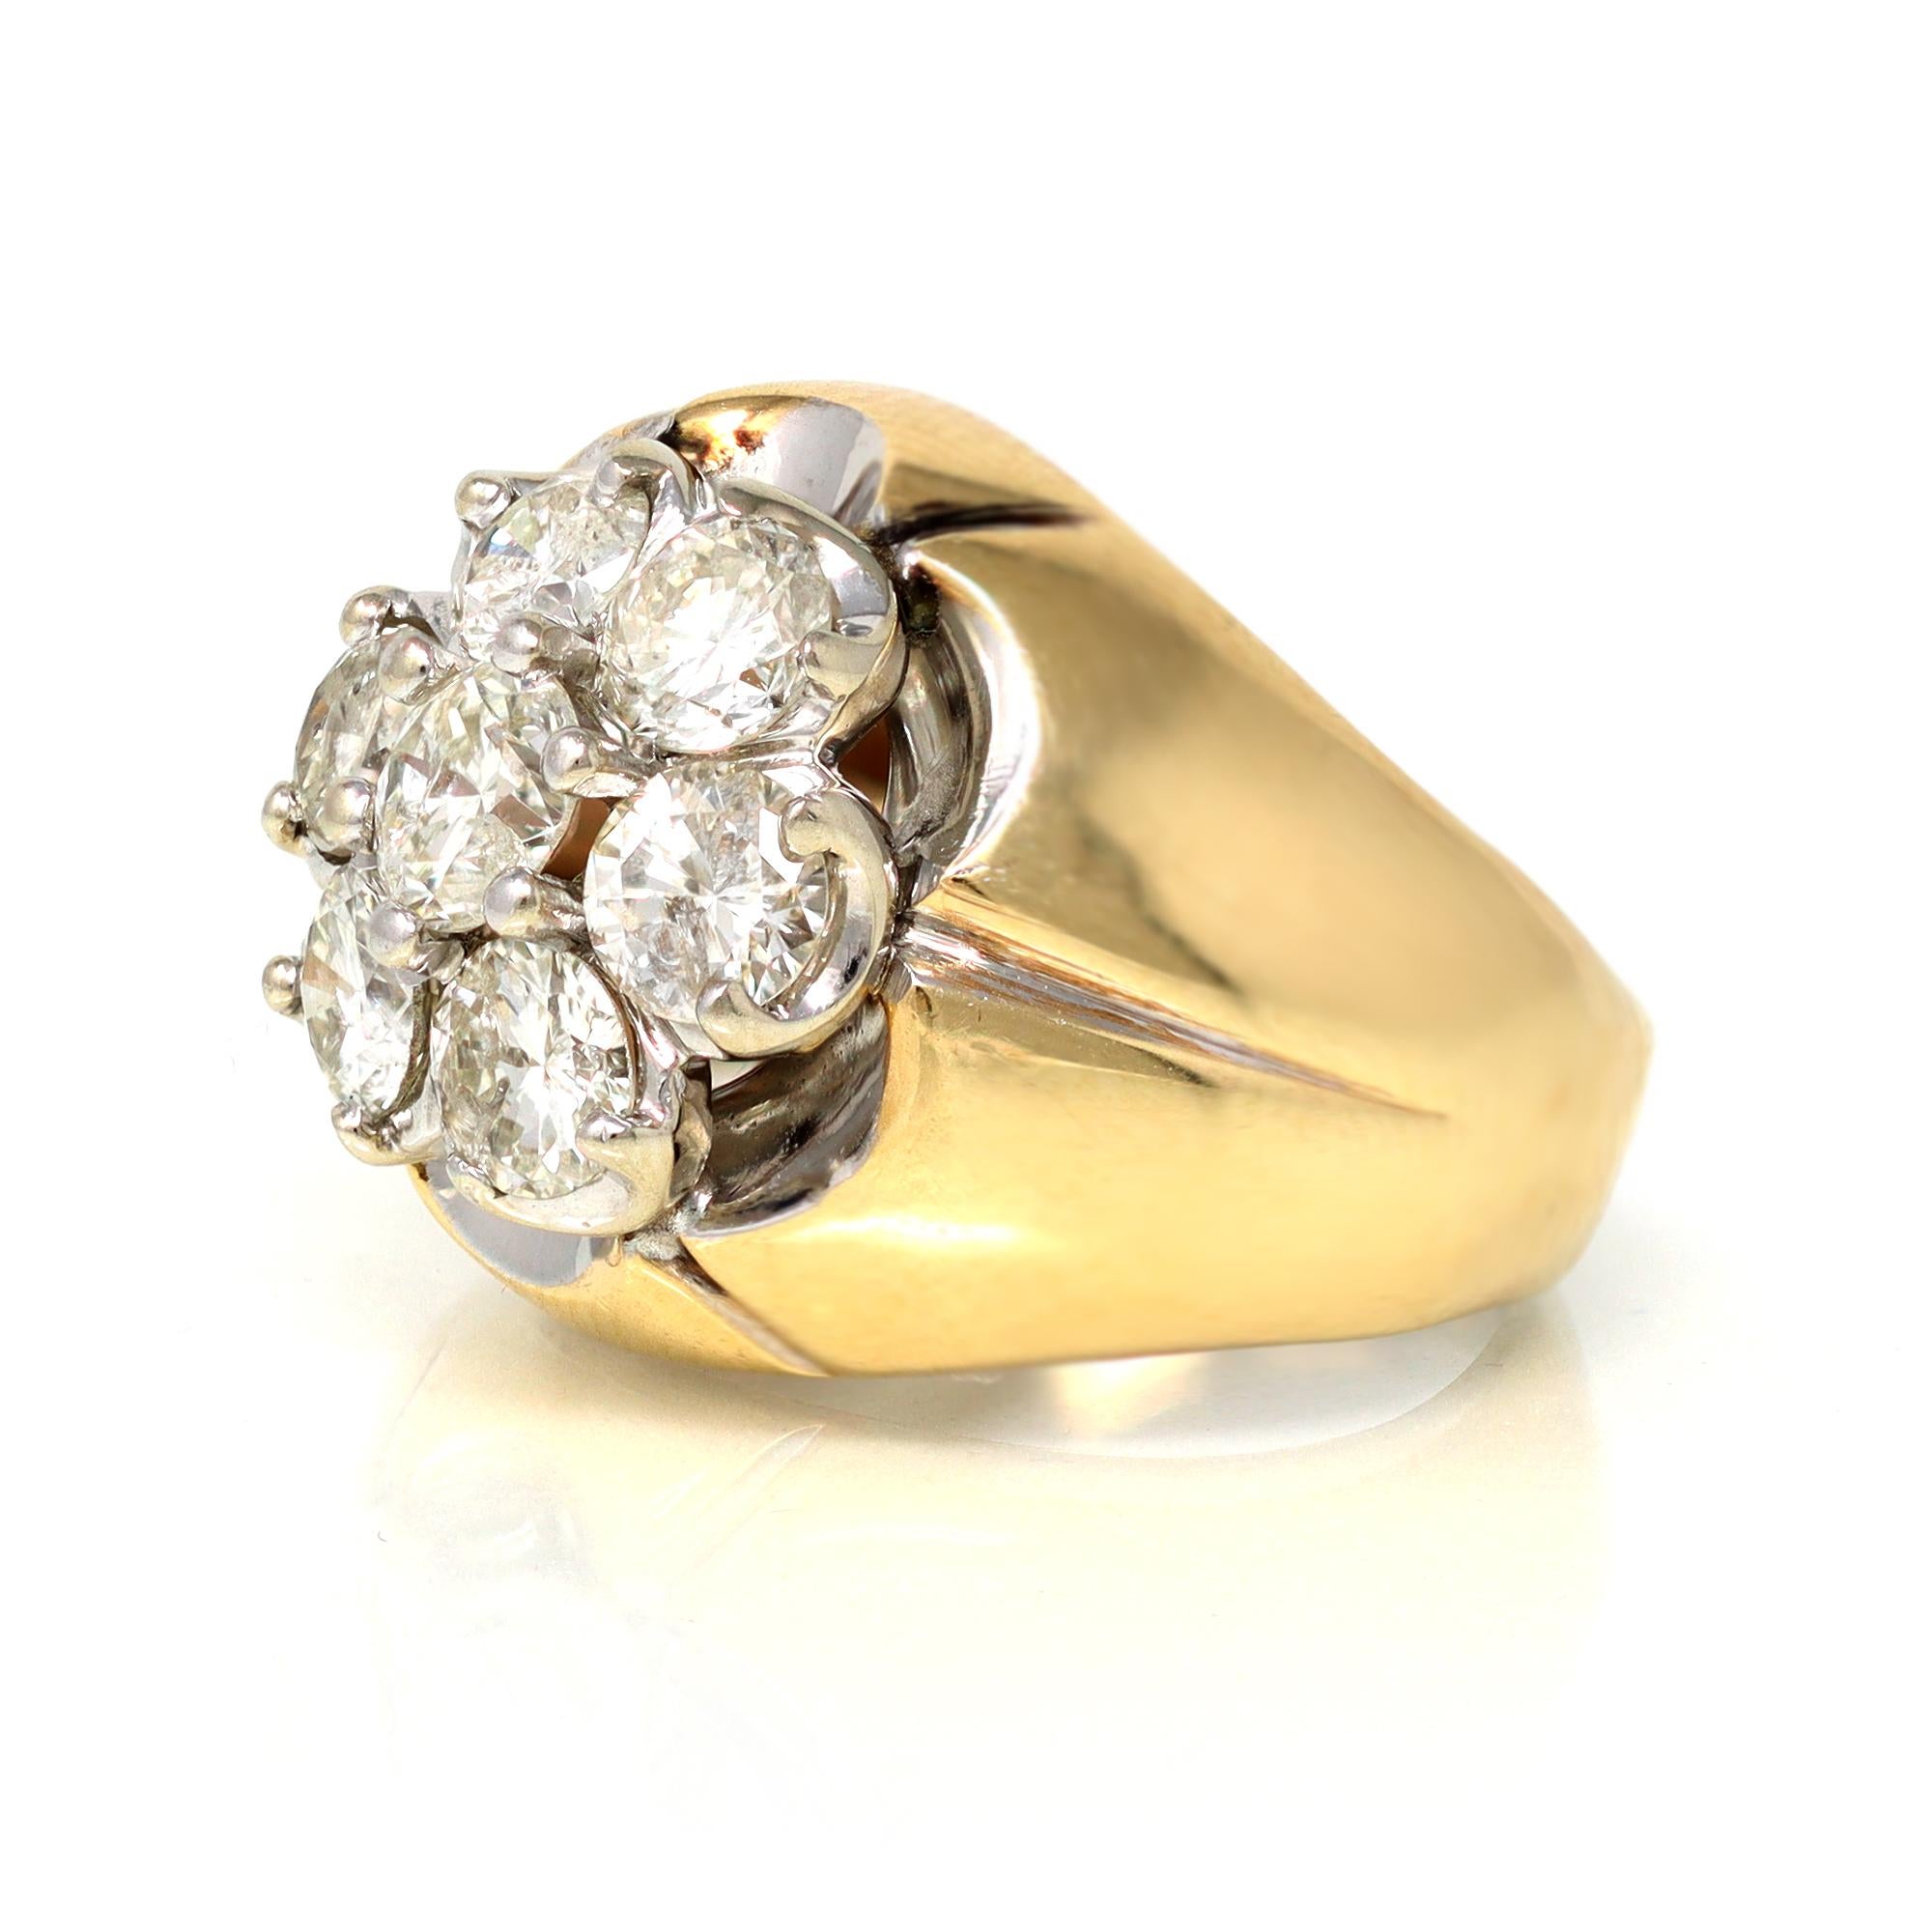 The impressive cluster diamond ring is circa 1950. It is styled in two-tone 14-karat yellow and white gold. It presents seven diamonds of approximately 0.35 carats each, with an estimated total carat weight of 2.40 carats. The diamonds have a grade